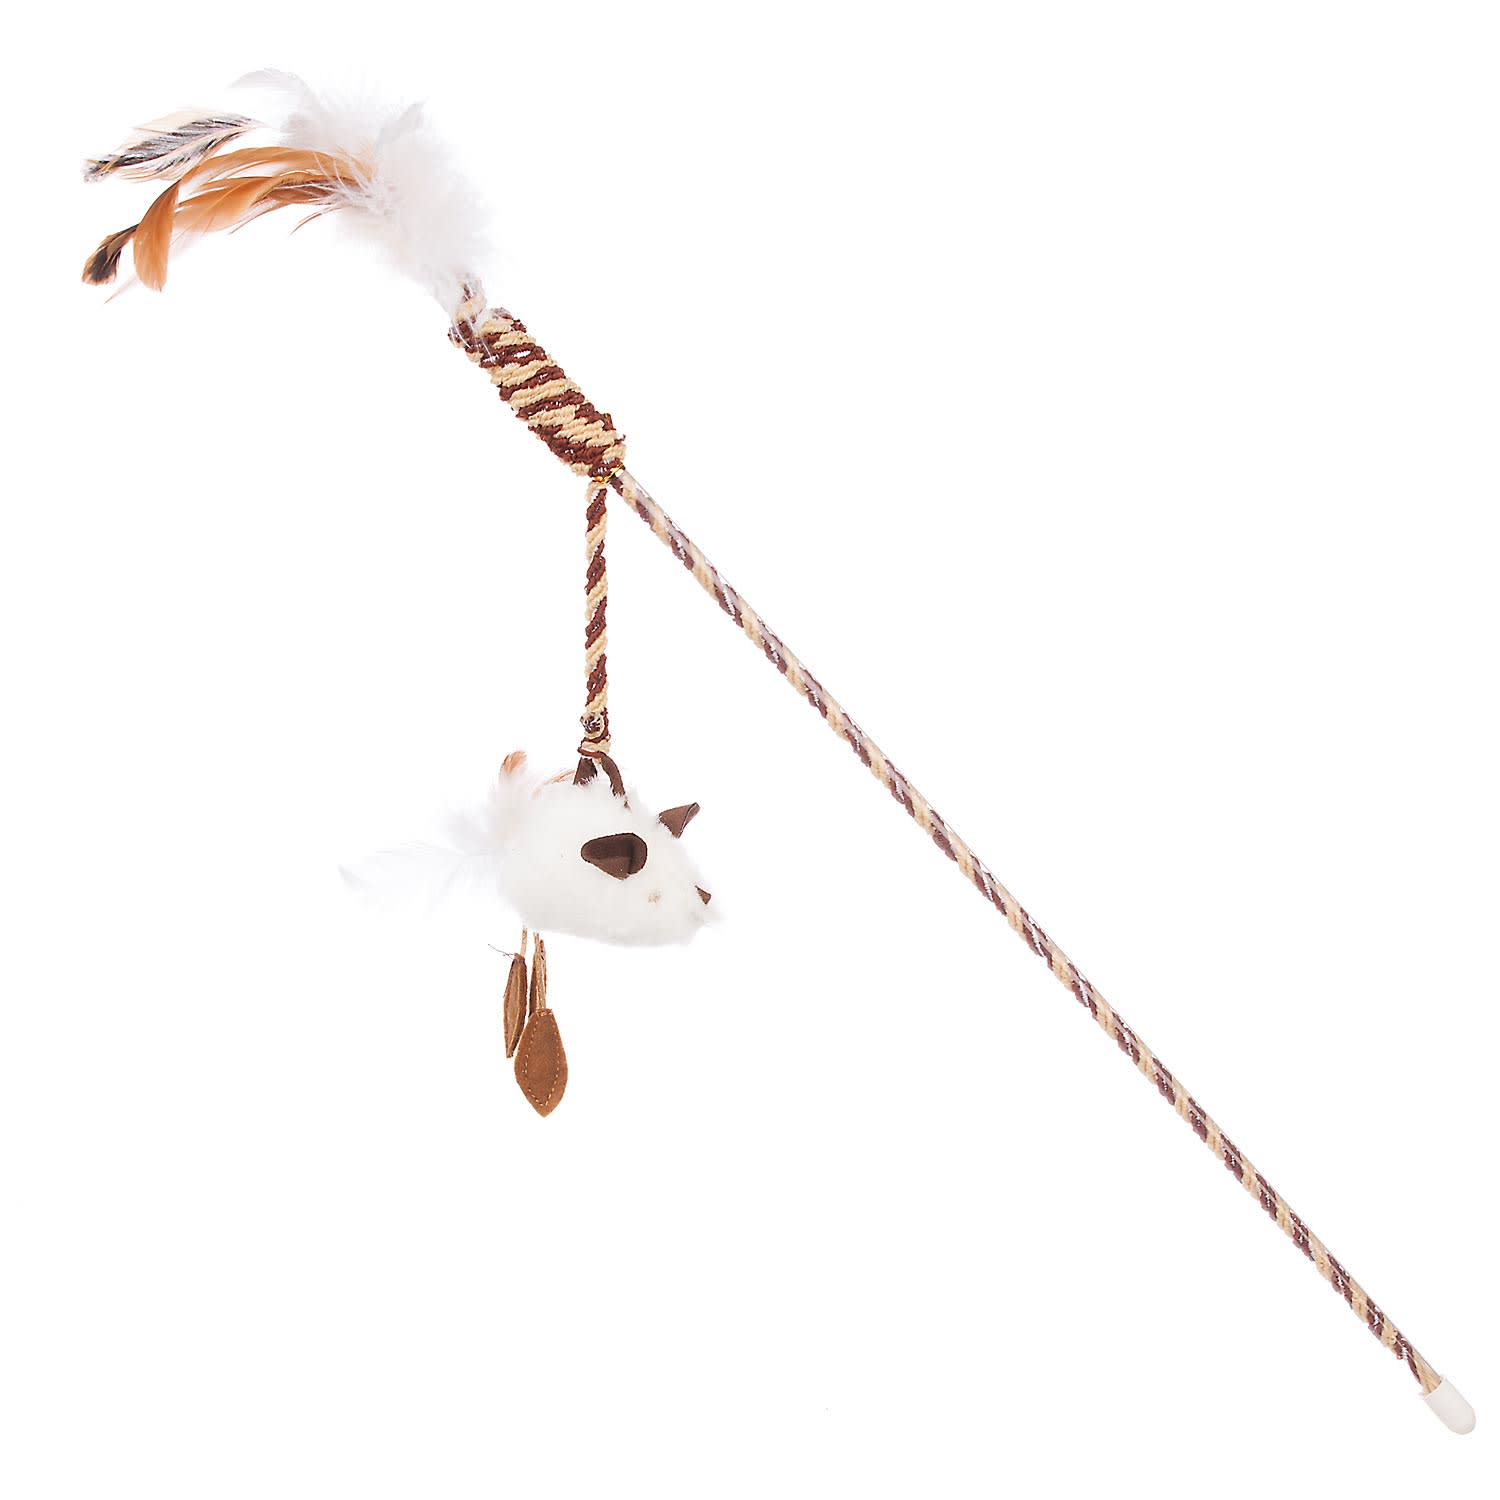 Dragonfly Mouse Interactive Cat Toys,Self-Hey Cat Scratch Rope Mouse Cat Stick Pet Cat Supplies Funny Cat Interactive Toy for Kitten Playing HFQF Cat Toy Hanging Door